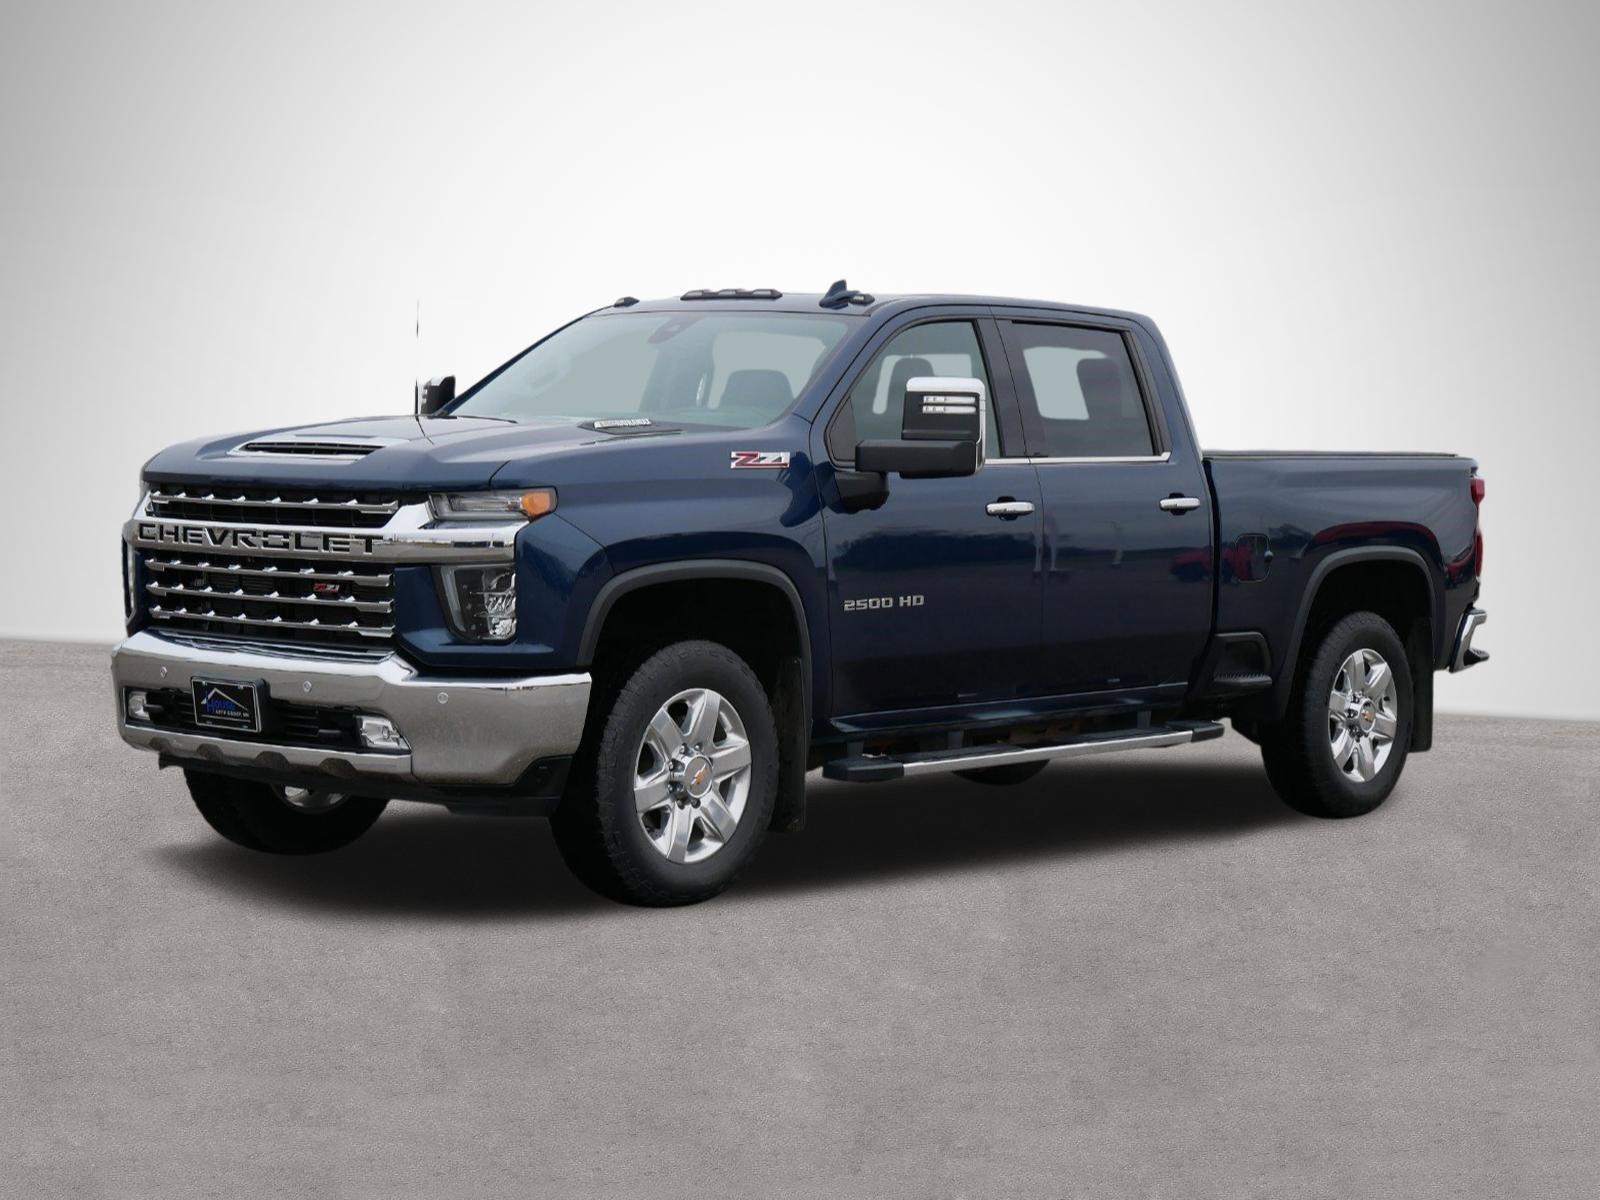 Used 2021 Chevrolet Silverado 2500HD LTZ with VIN 1GC4YPEYXMF227670 for sale in Owatonna, Minnesota